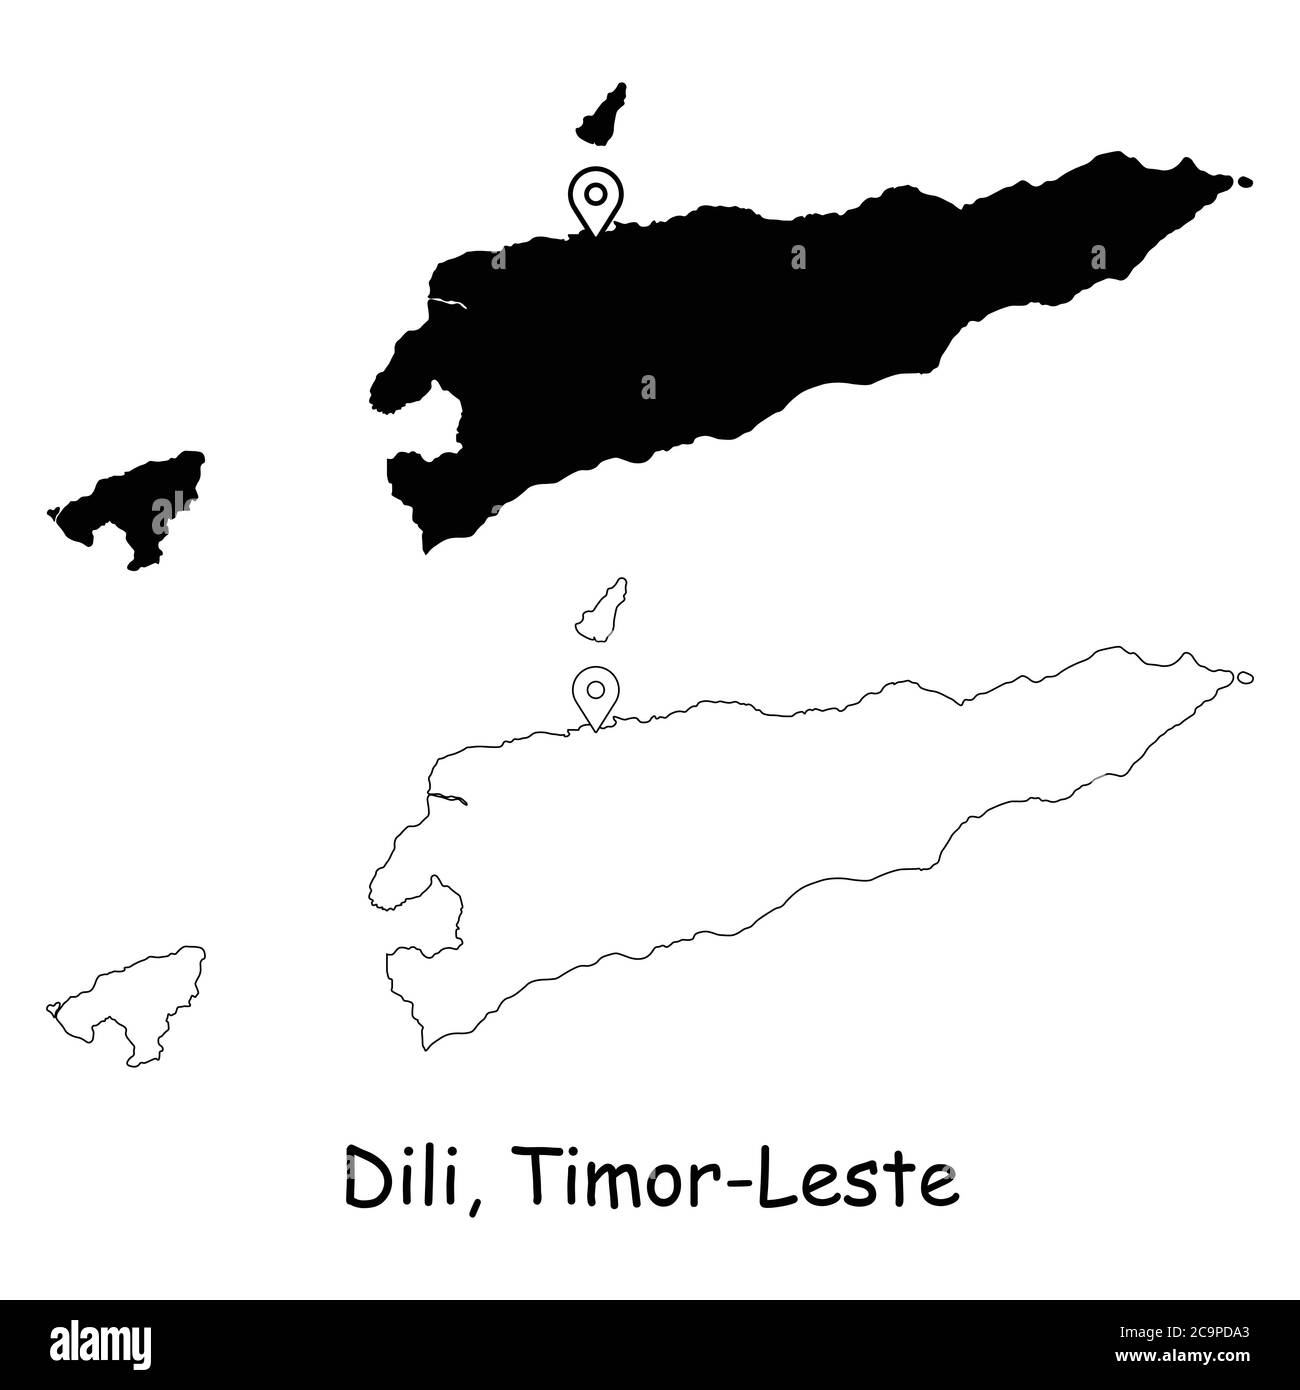 Dili, Timor-Leste. Detailed Country Map with Location Pin on Capital City. Black silhouette and outline maps isolated on white background. EPS Vector Stock Vector